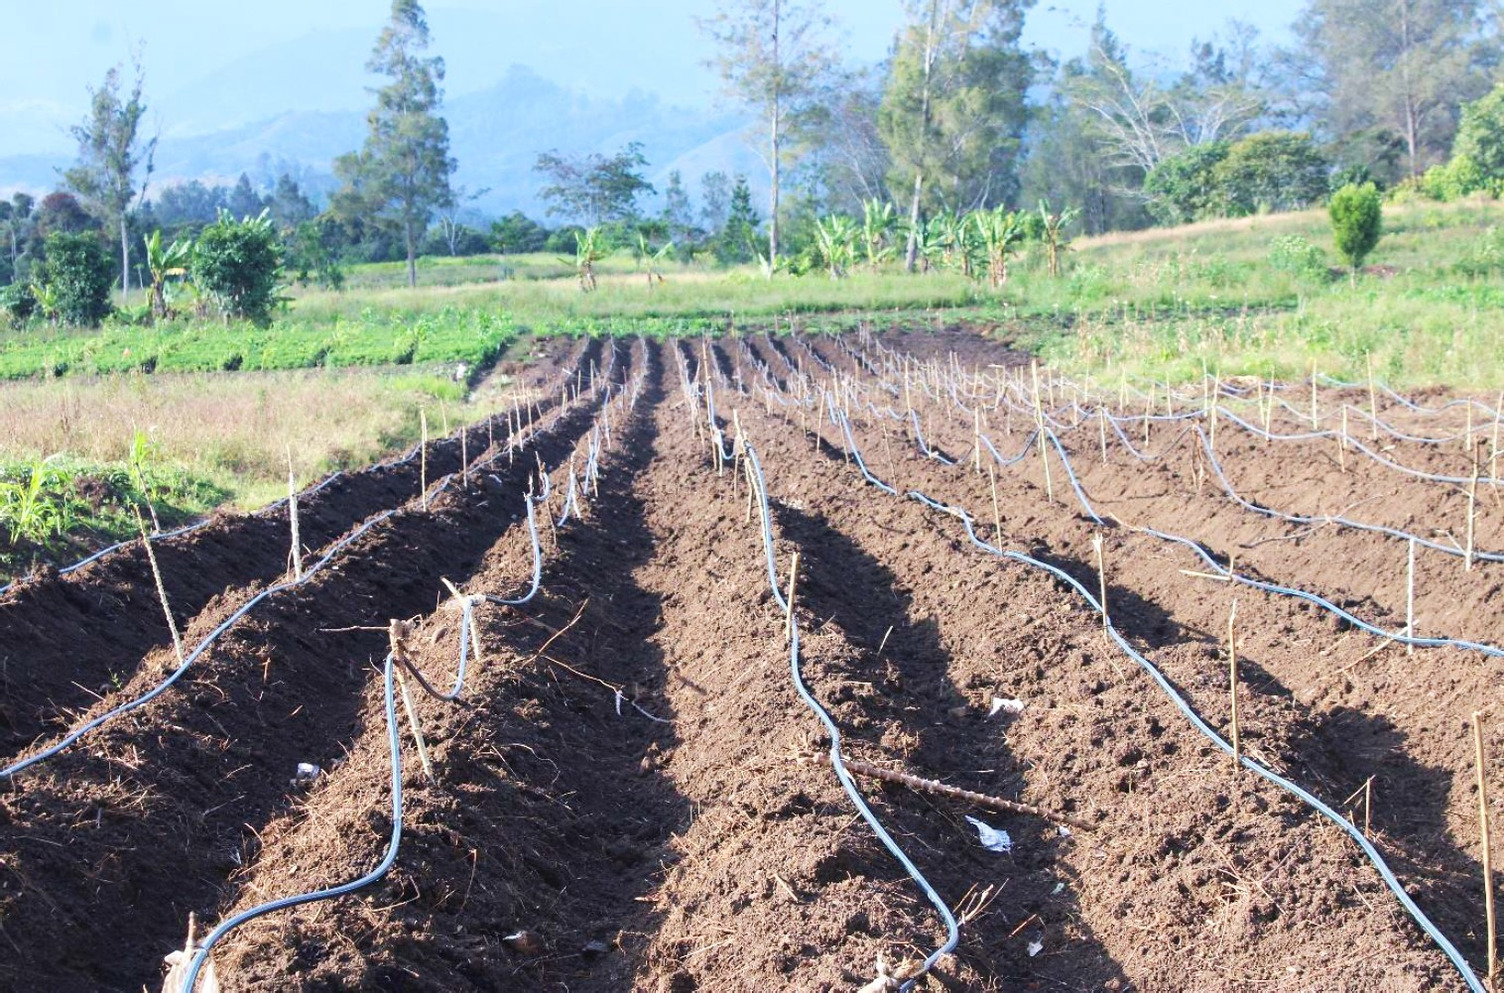 Newly constructed irrigation system on Rachel’s farm at Minj, Jiwaka province. Rachael is among the first to trial the irrigation system as part of ACIAR research to improve sweetpotato production in the Highlands of PNG.